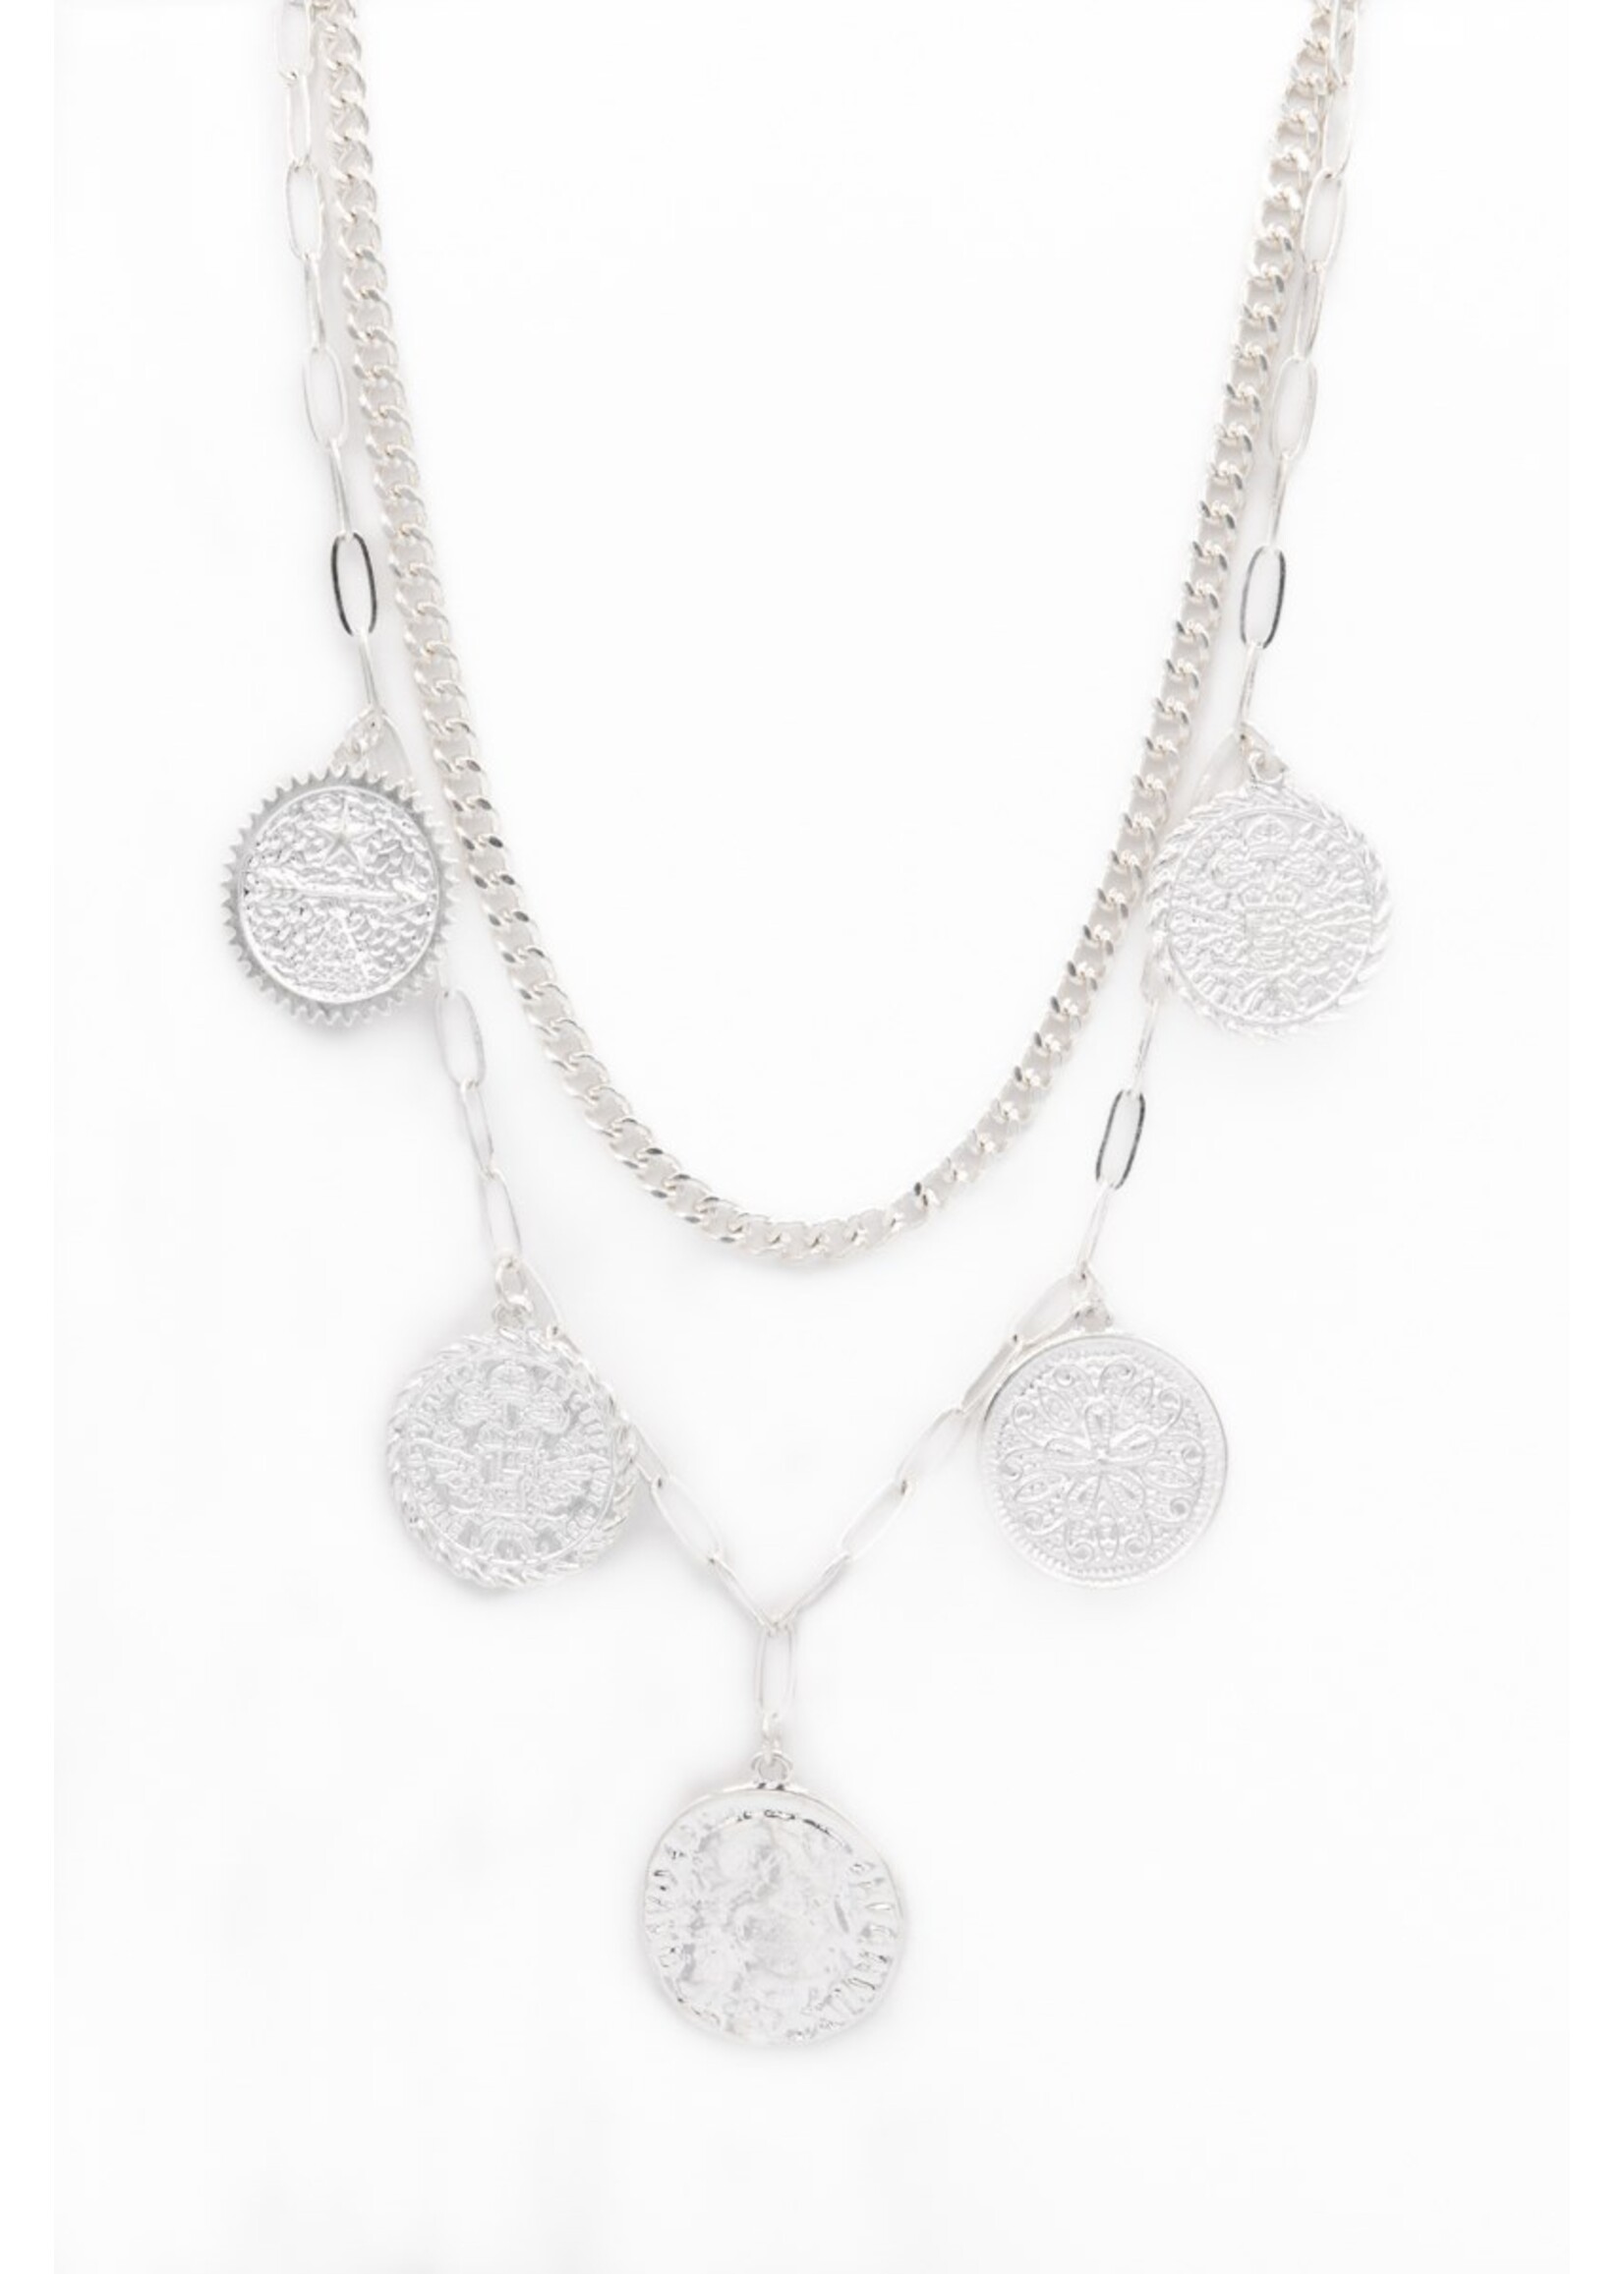 Caracol 2 Row Necklace W/Metal Charms